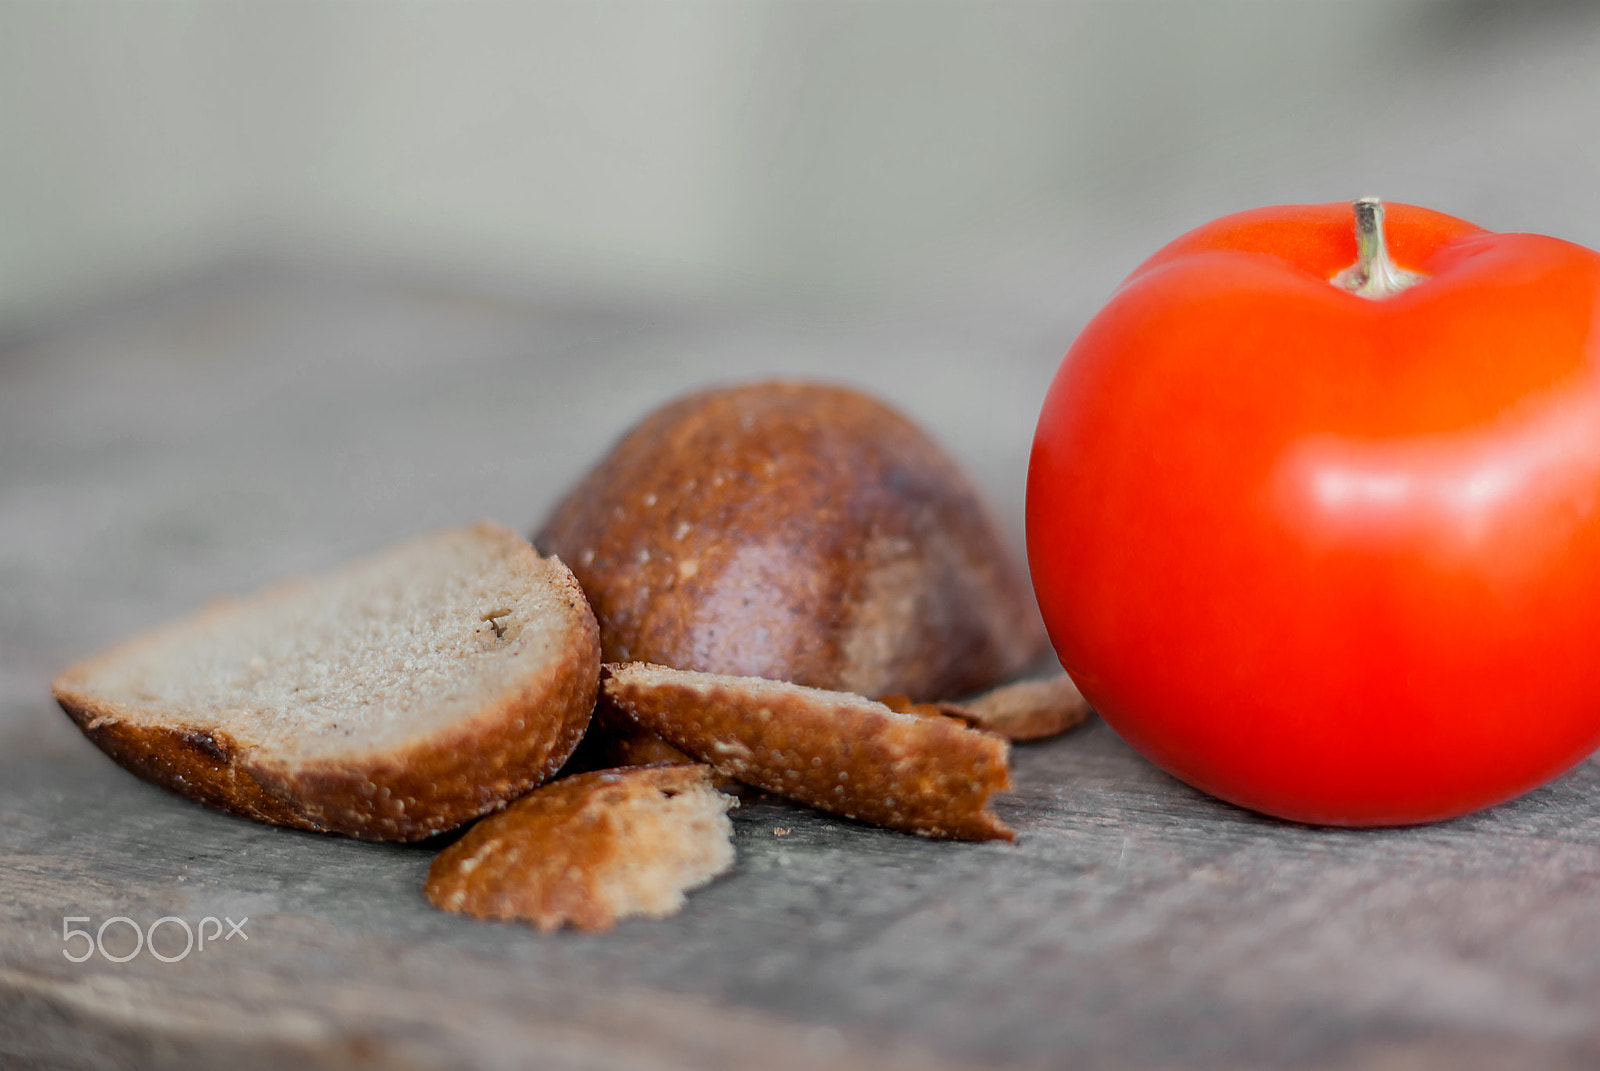 Pentax K10D sample photo. Ripe tomato with slices of rye bread photography